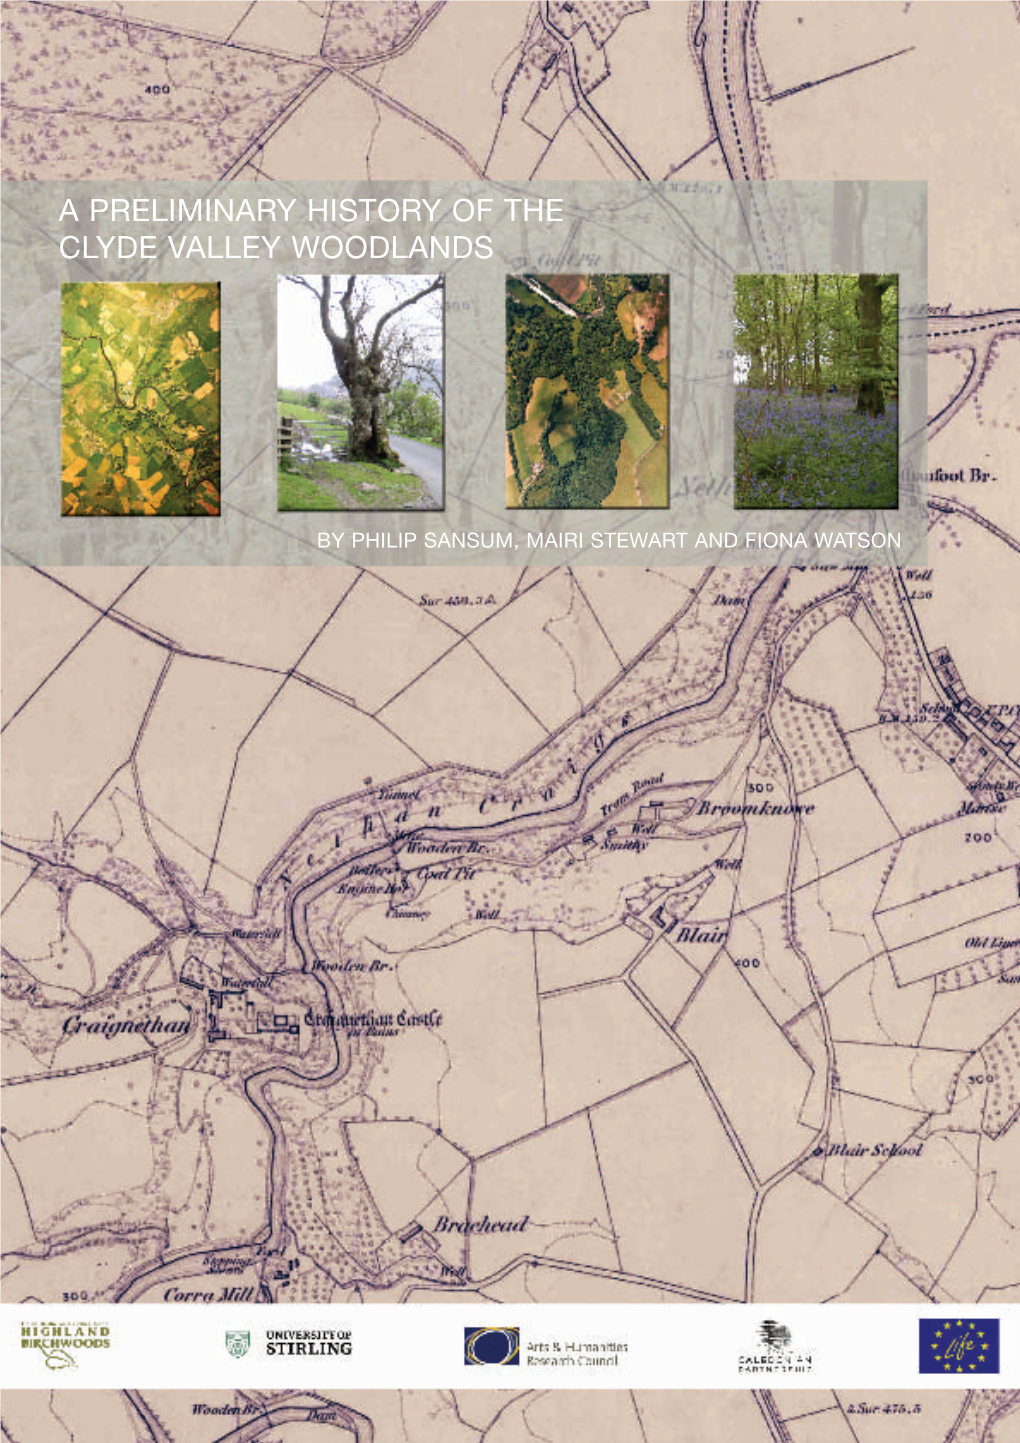 A Preliminary History of the Clyde Valley Woodlands